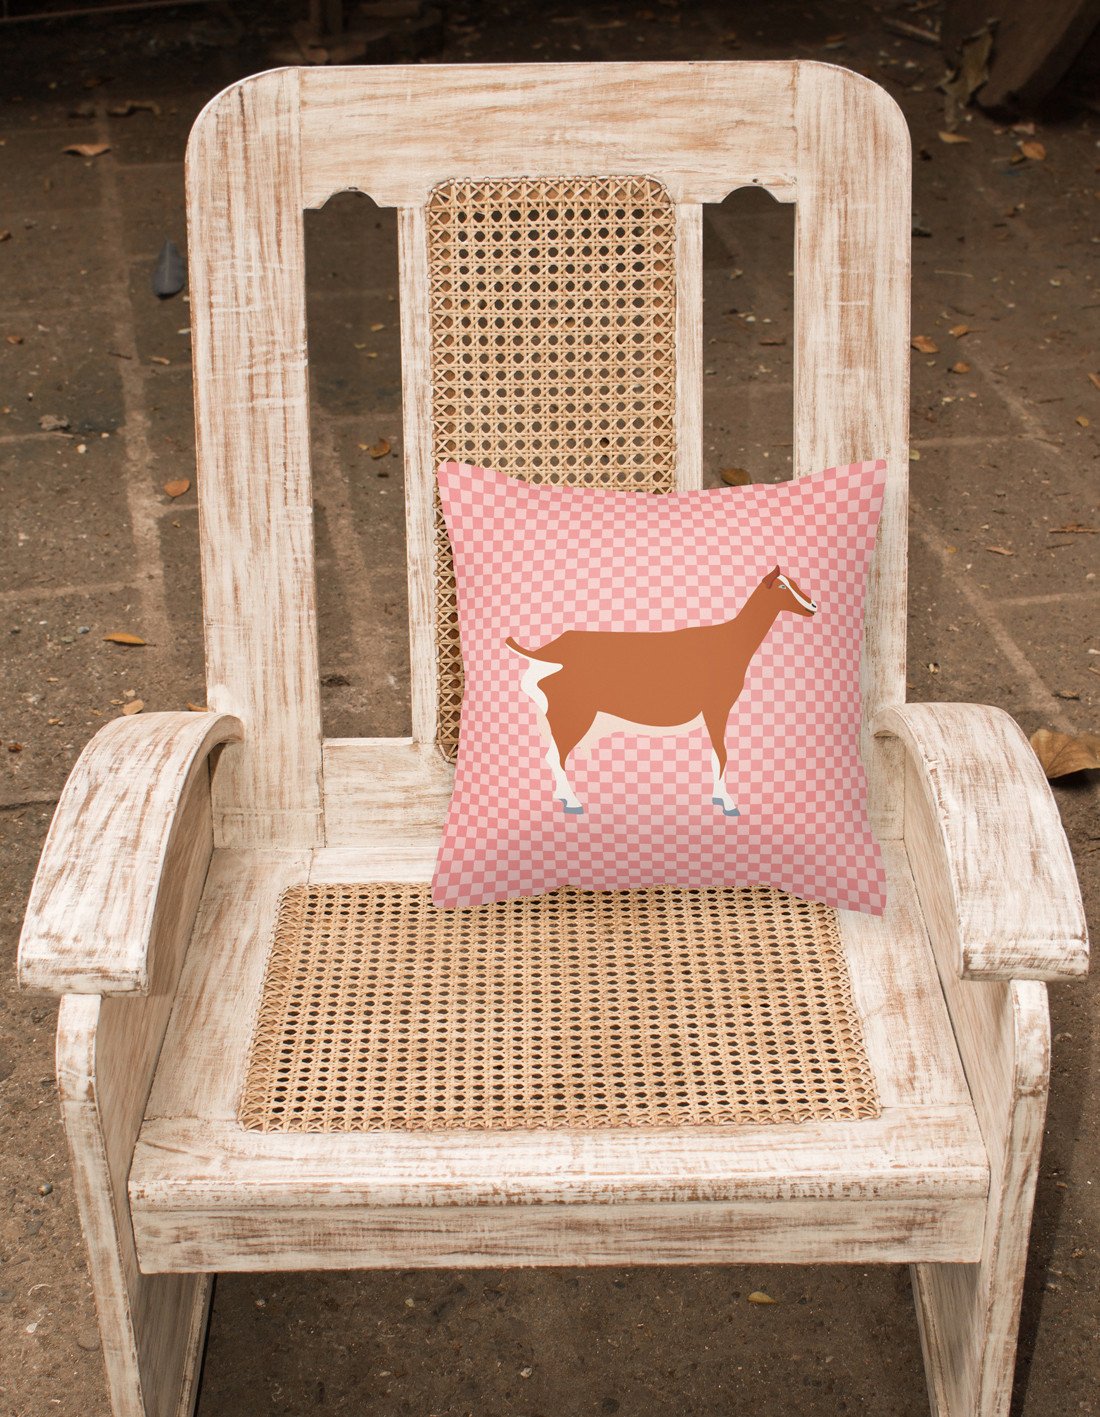 Toggenburger Goat Pink Check Fabric Decorative Pillow BB7881PW1818 by Caroline's Treasures